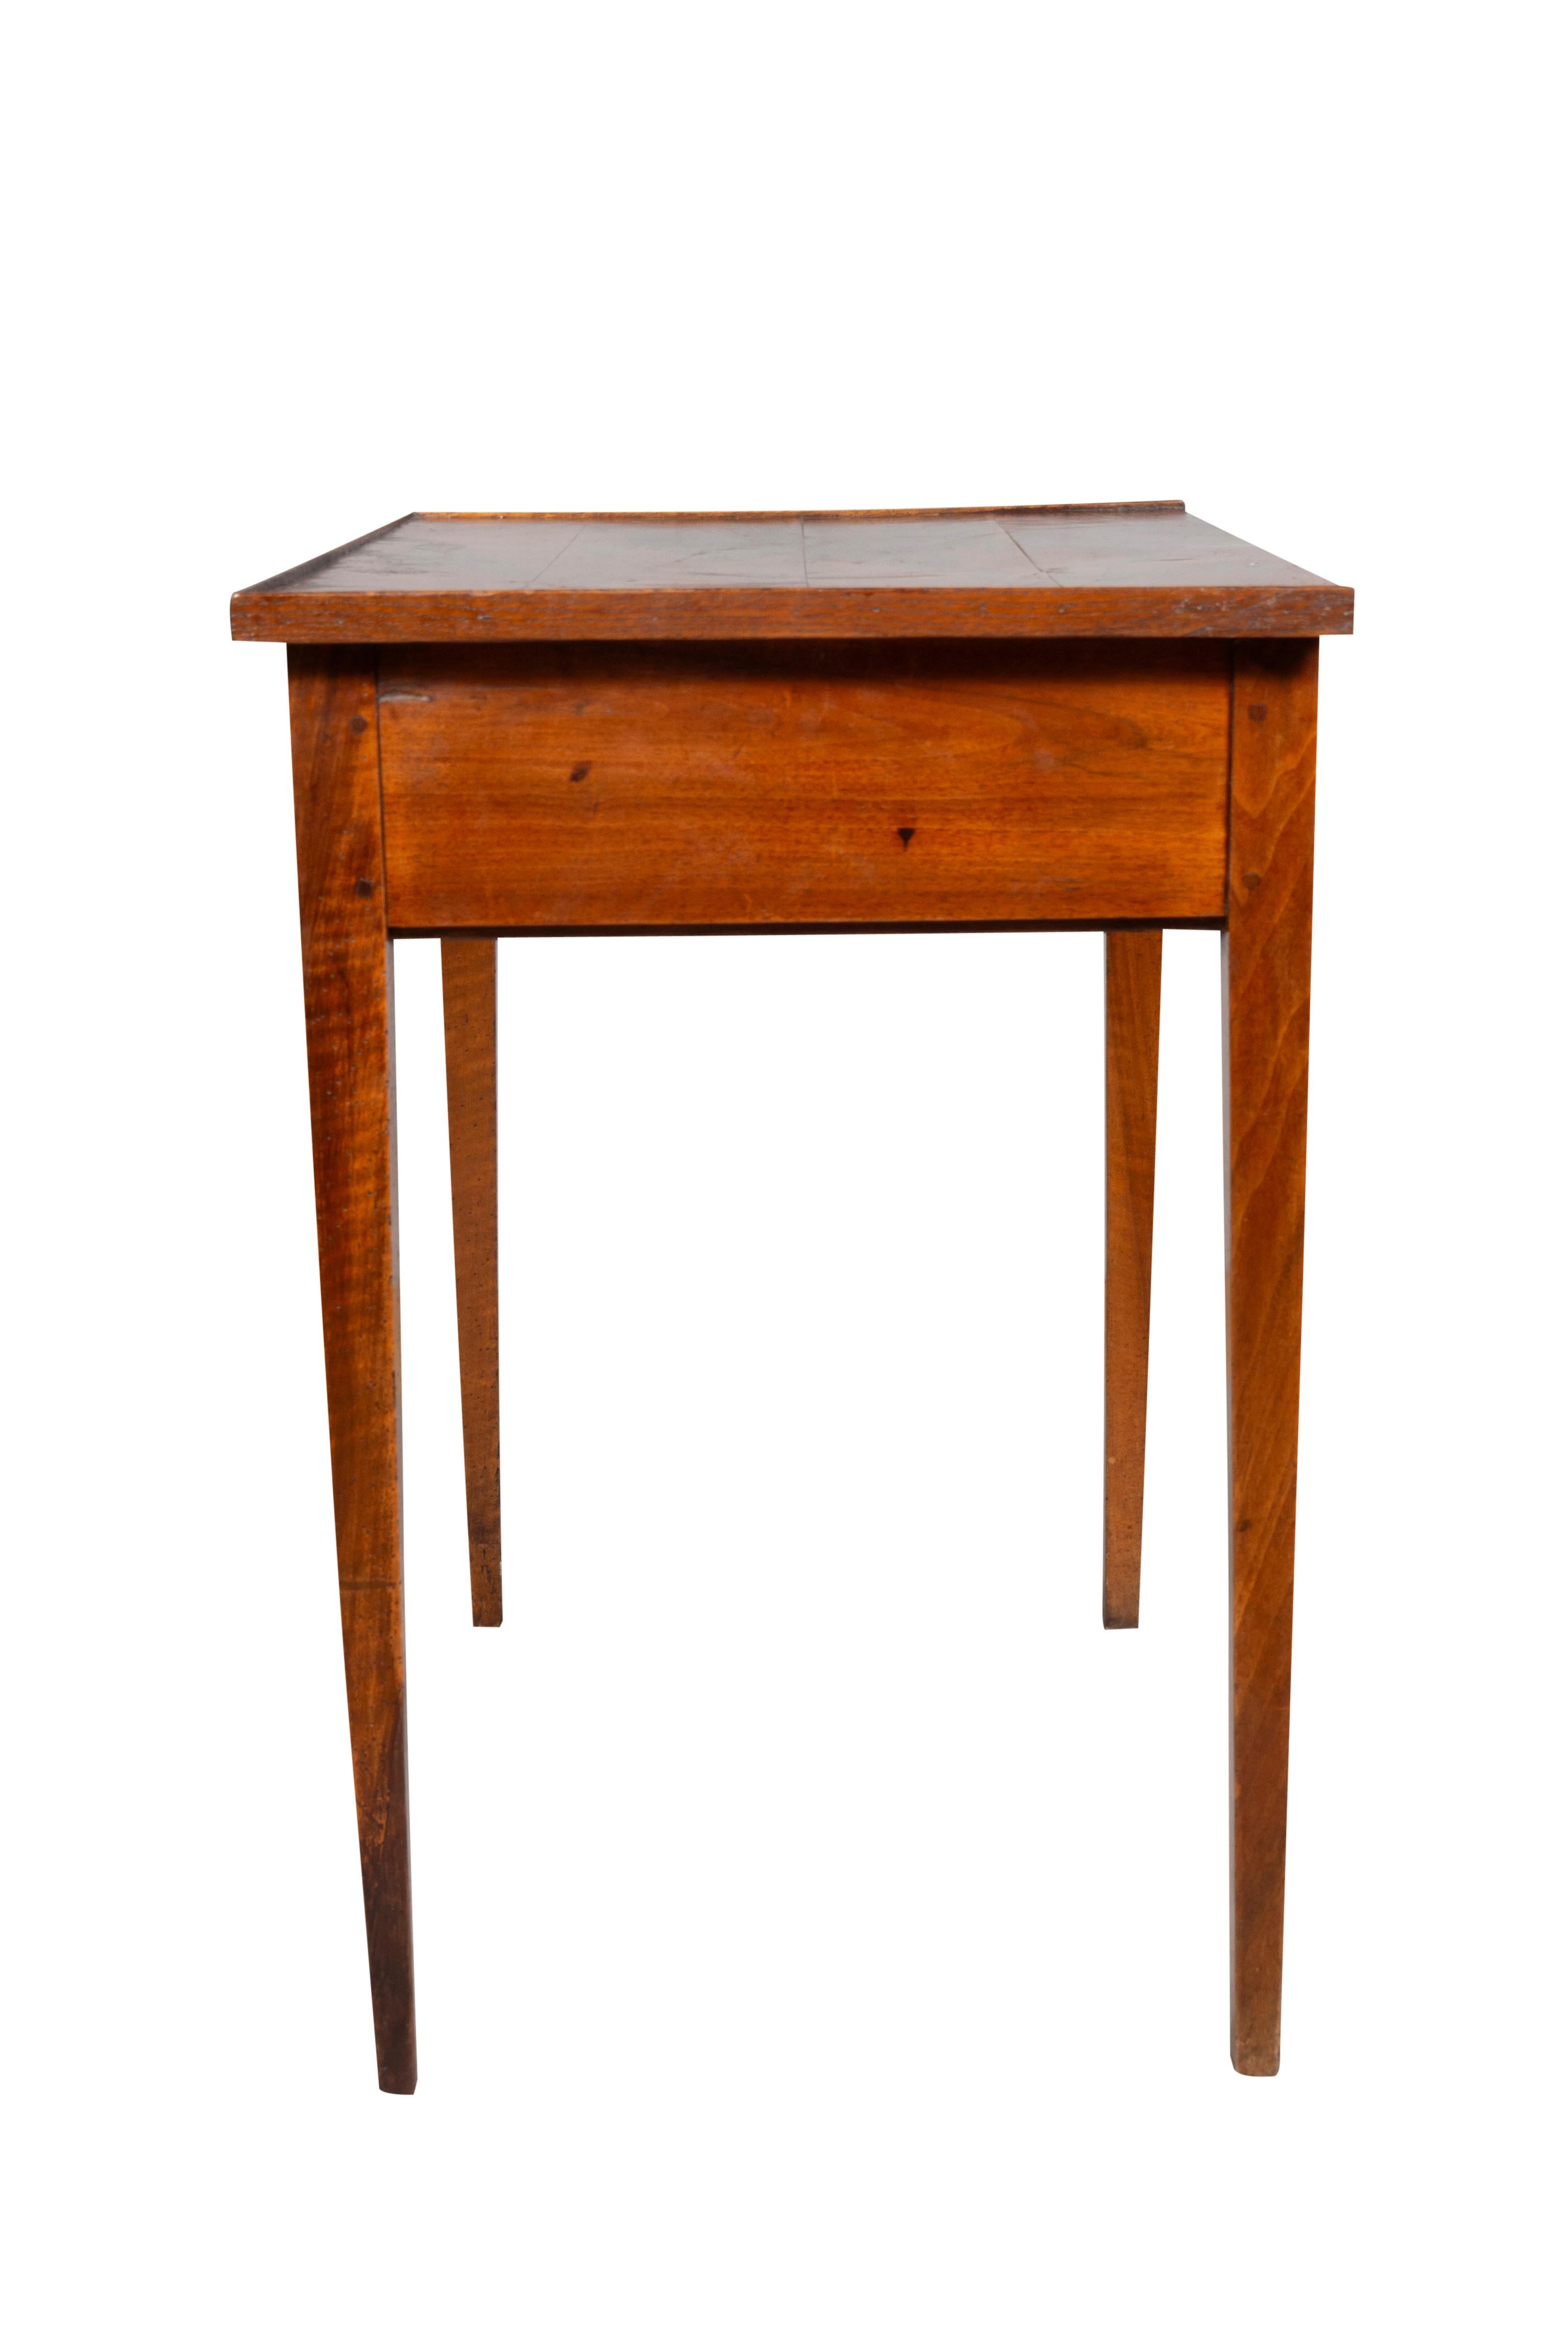 Directoire Provincial Walnut Table In Good Condition For Sale In Essex, MA